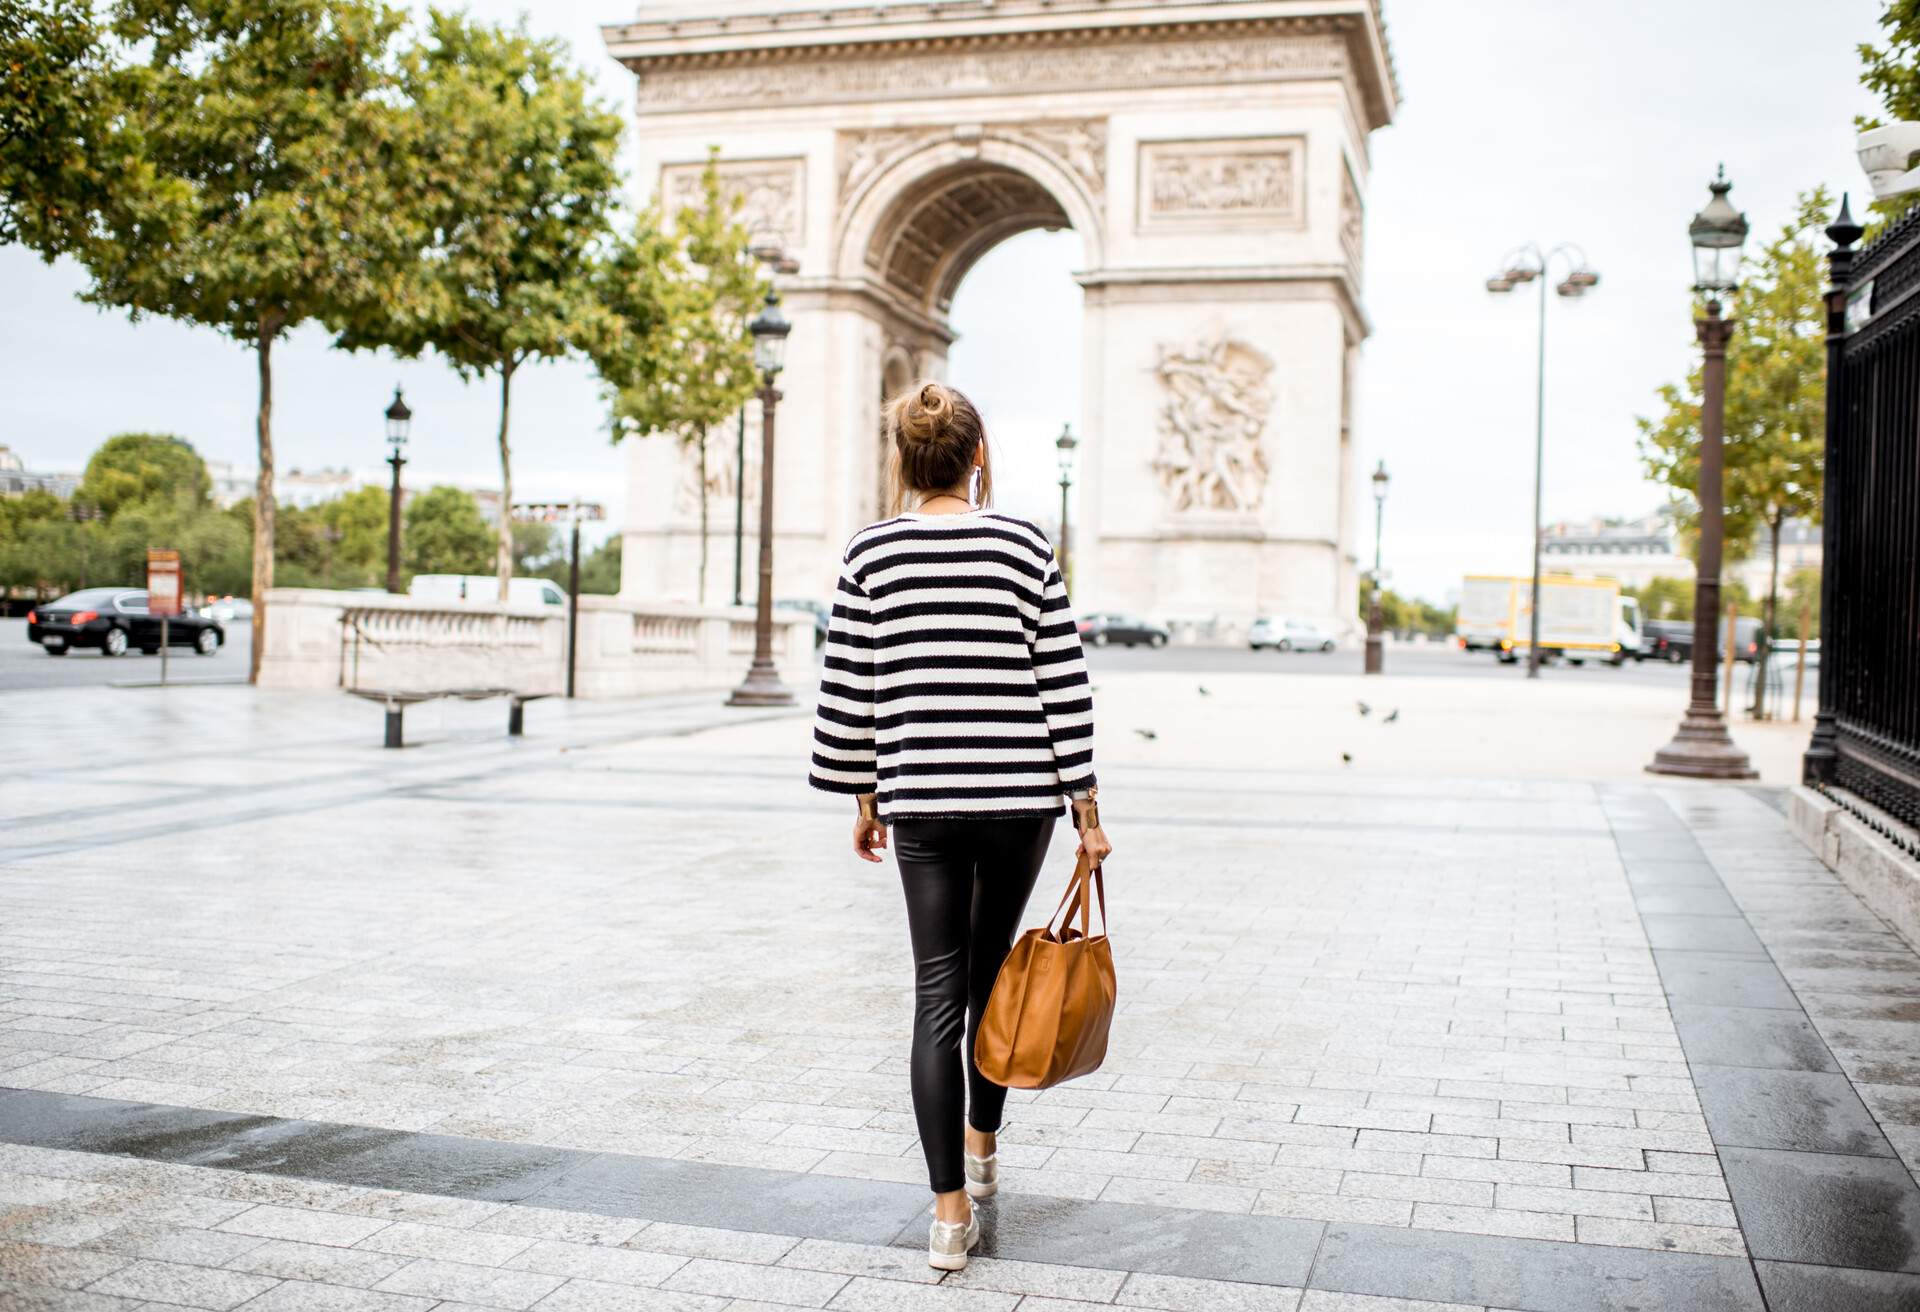 Lifestyle portrait of a young stylish business woman walking outdoors near the famous triumphal arch in Paris